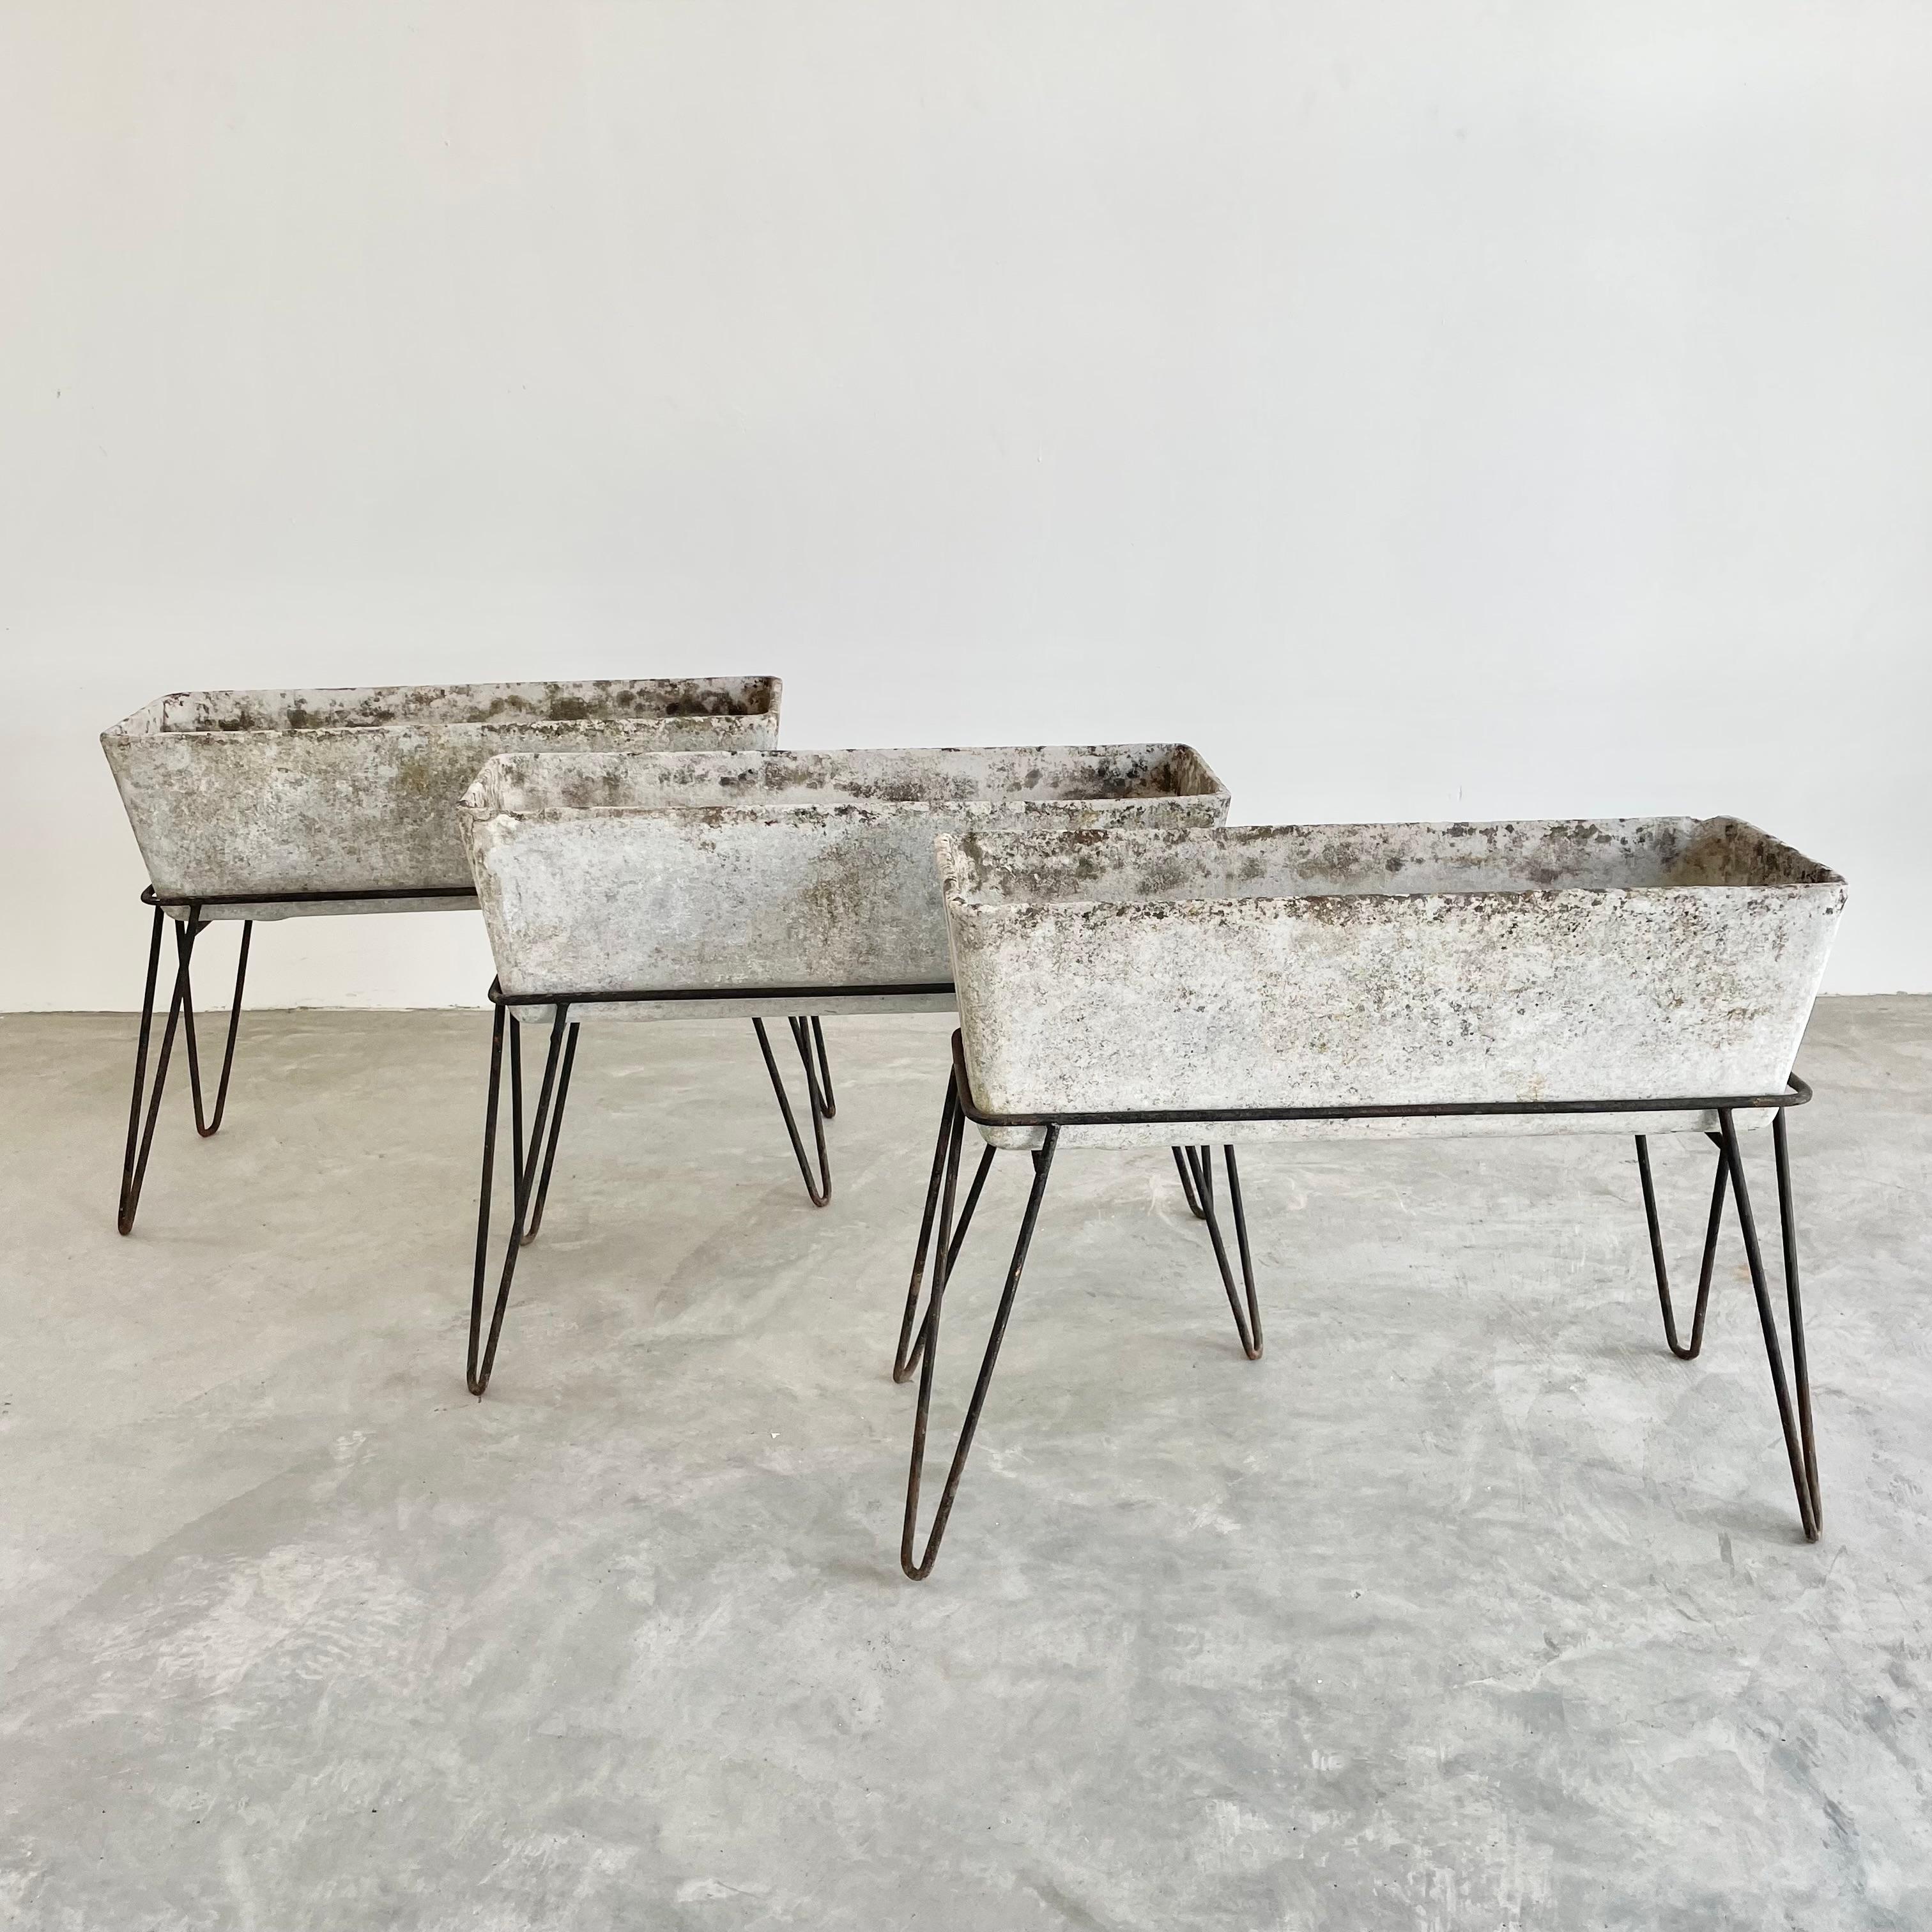 Willy Guhl Concrete Trough Planter on Iron Hairpin Stand, 1975 Switzerland For Sale 9